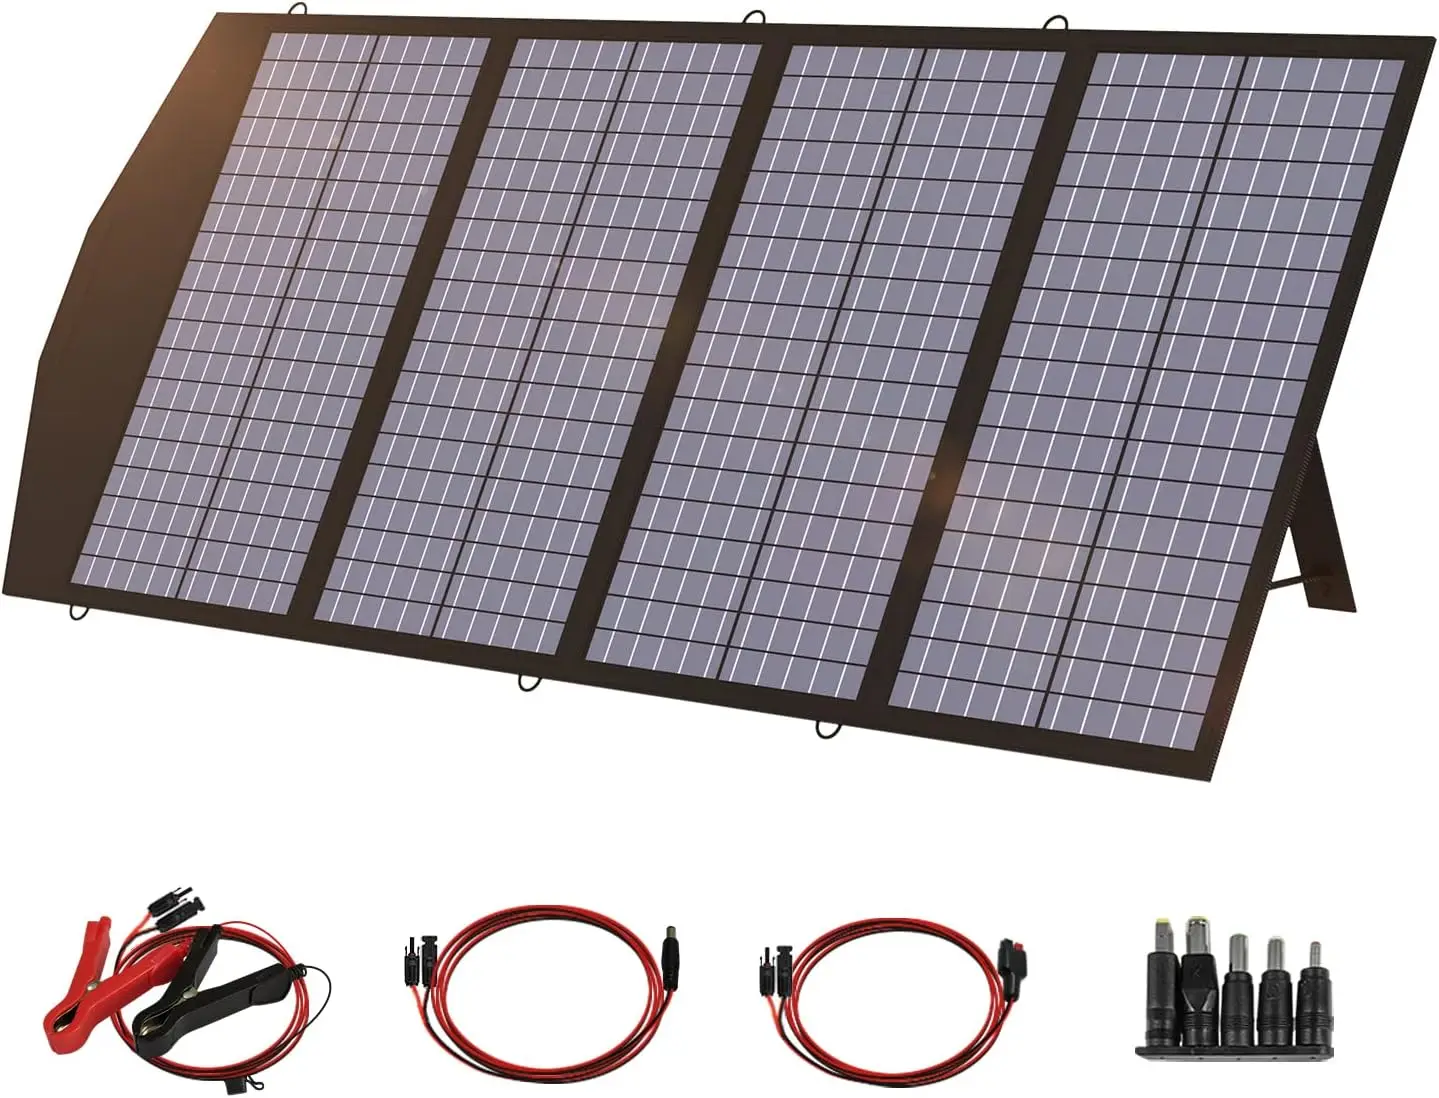 

Portable Solar Panel Charger for Laptop Cellphone, Waterproof IP65 Foldable Solar Panel with MC- 4, DC, and USB Output